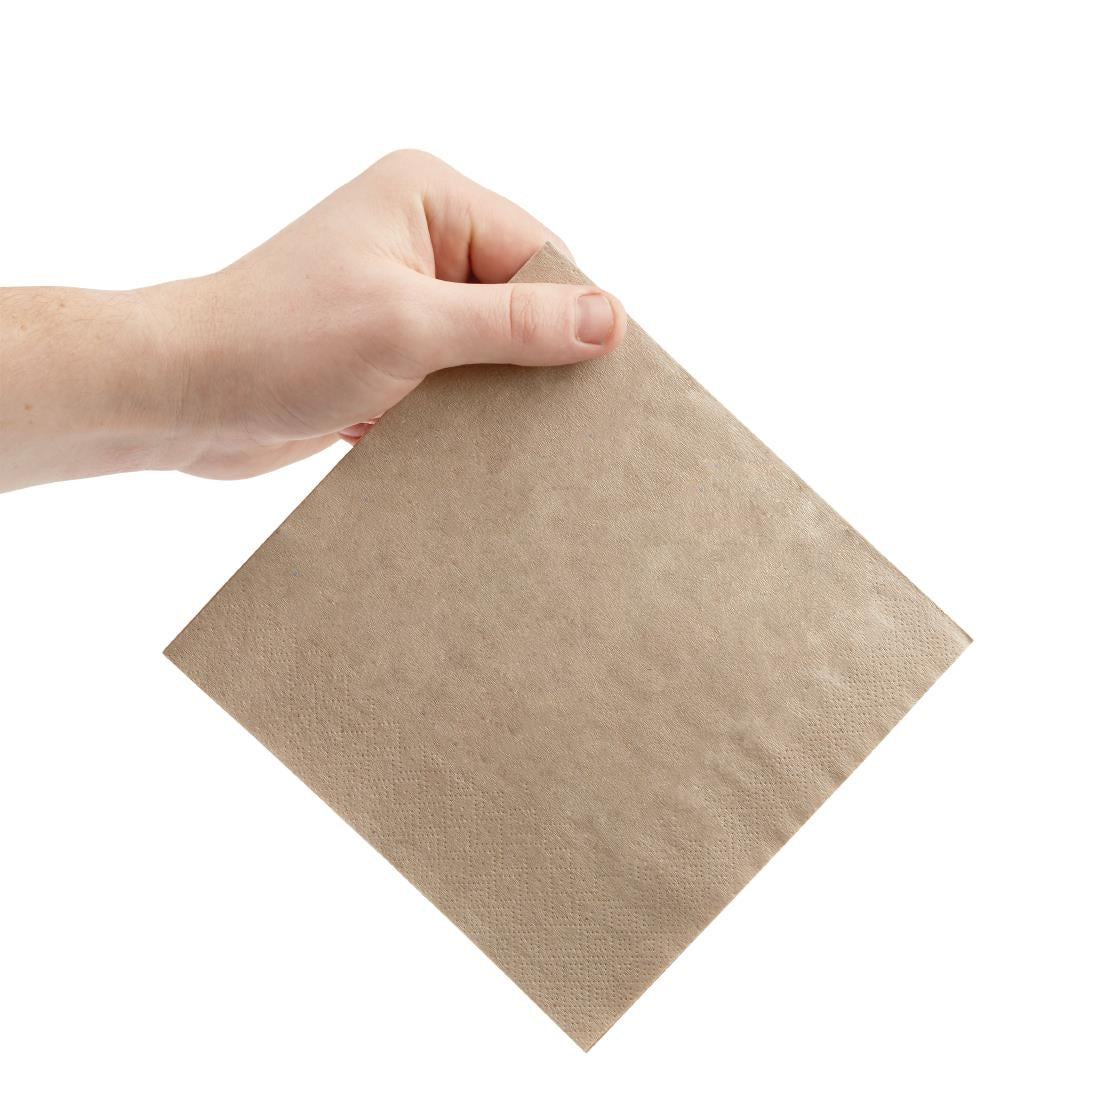 Fiesta Recycled Kraft Lunch Napkins 330mm (Pack of 2000) JD Catering Equipment Solutions Ltd